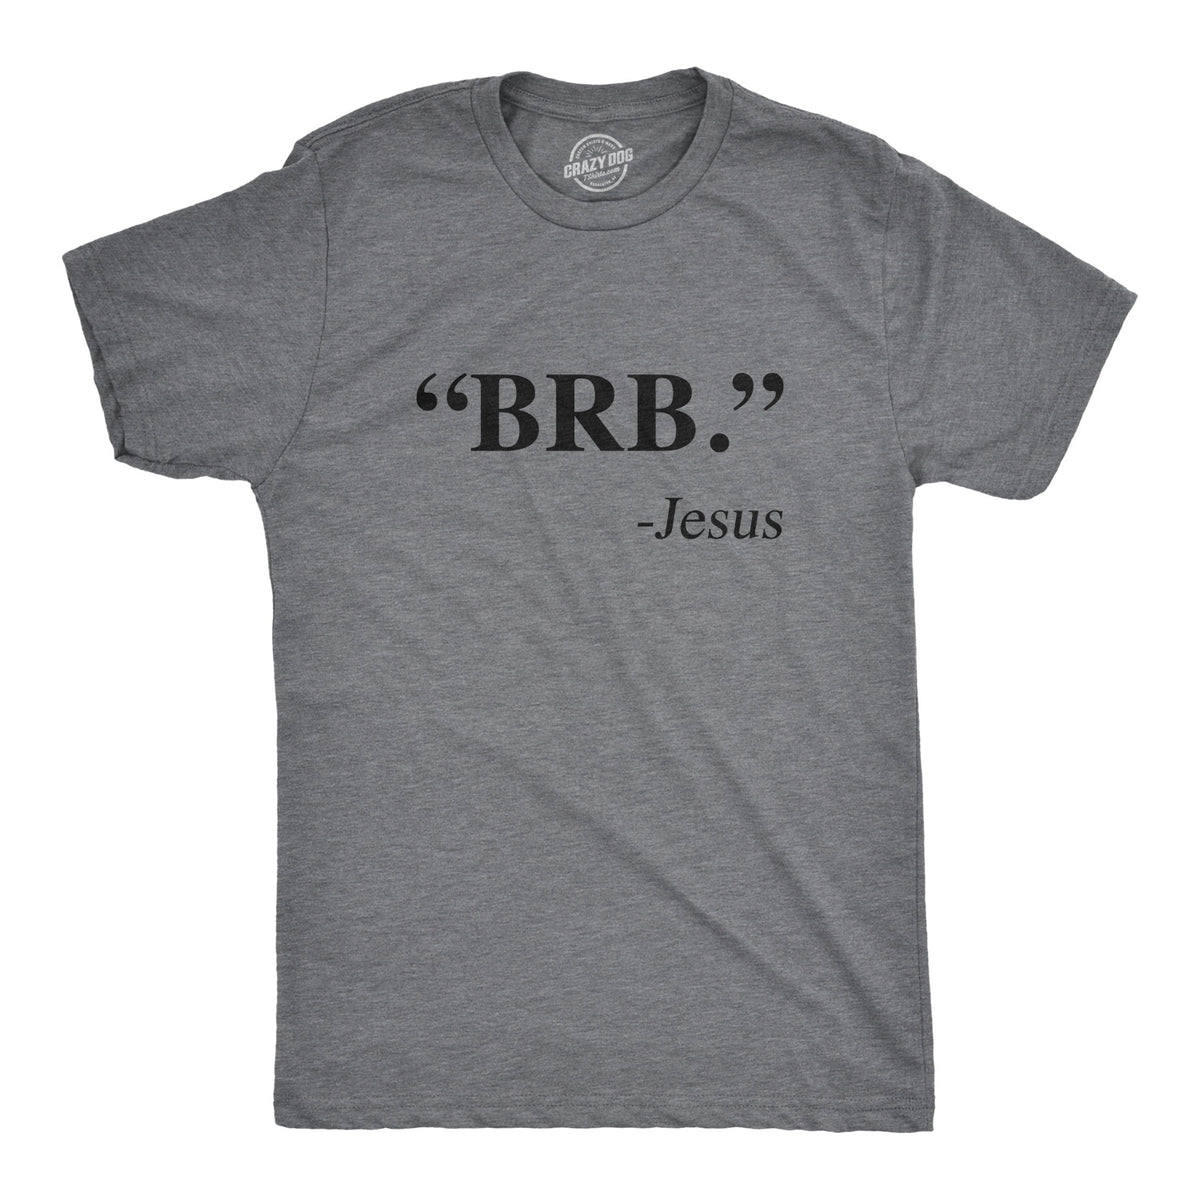 Funny Dark Heather Grey - BRB &quot;BRB.&quot; - Jesus Mens T Shirt Nerdy Easter Religion Tee